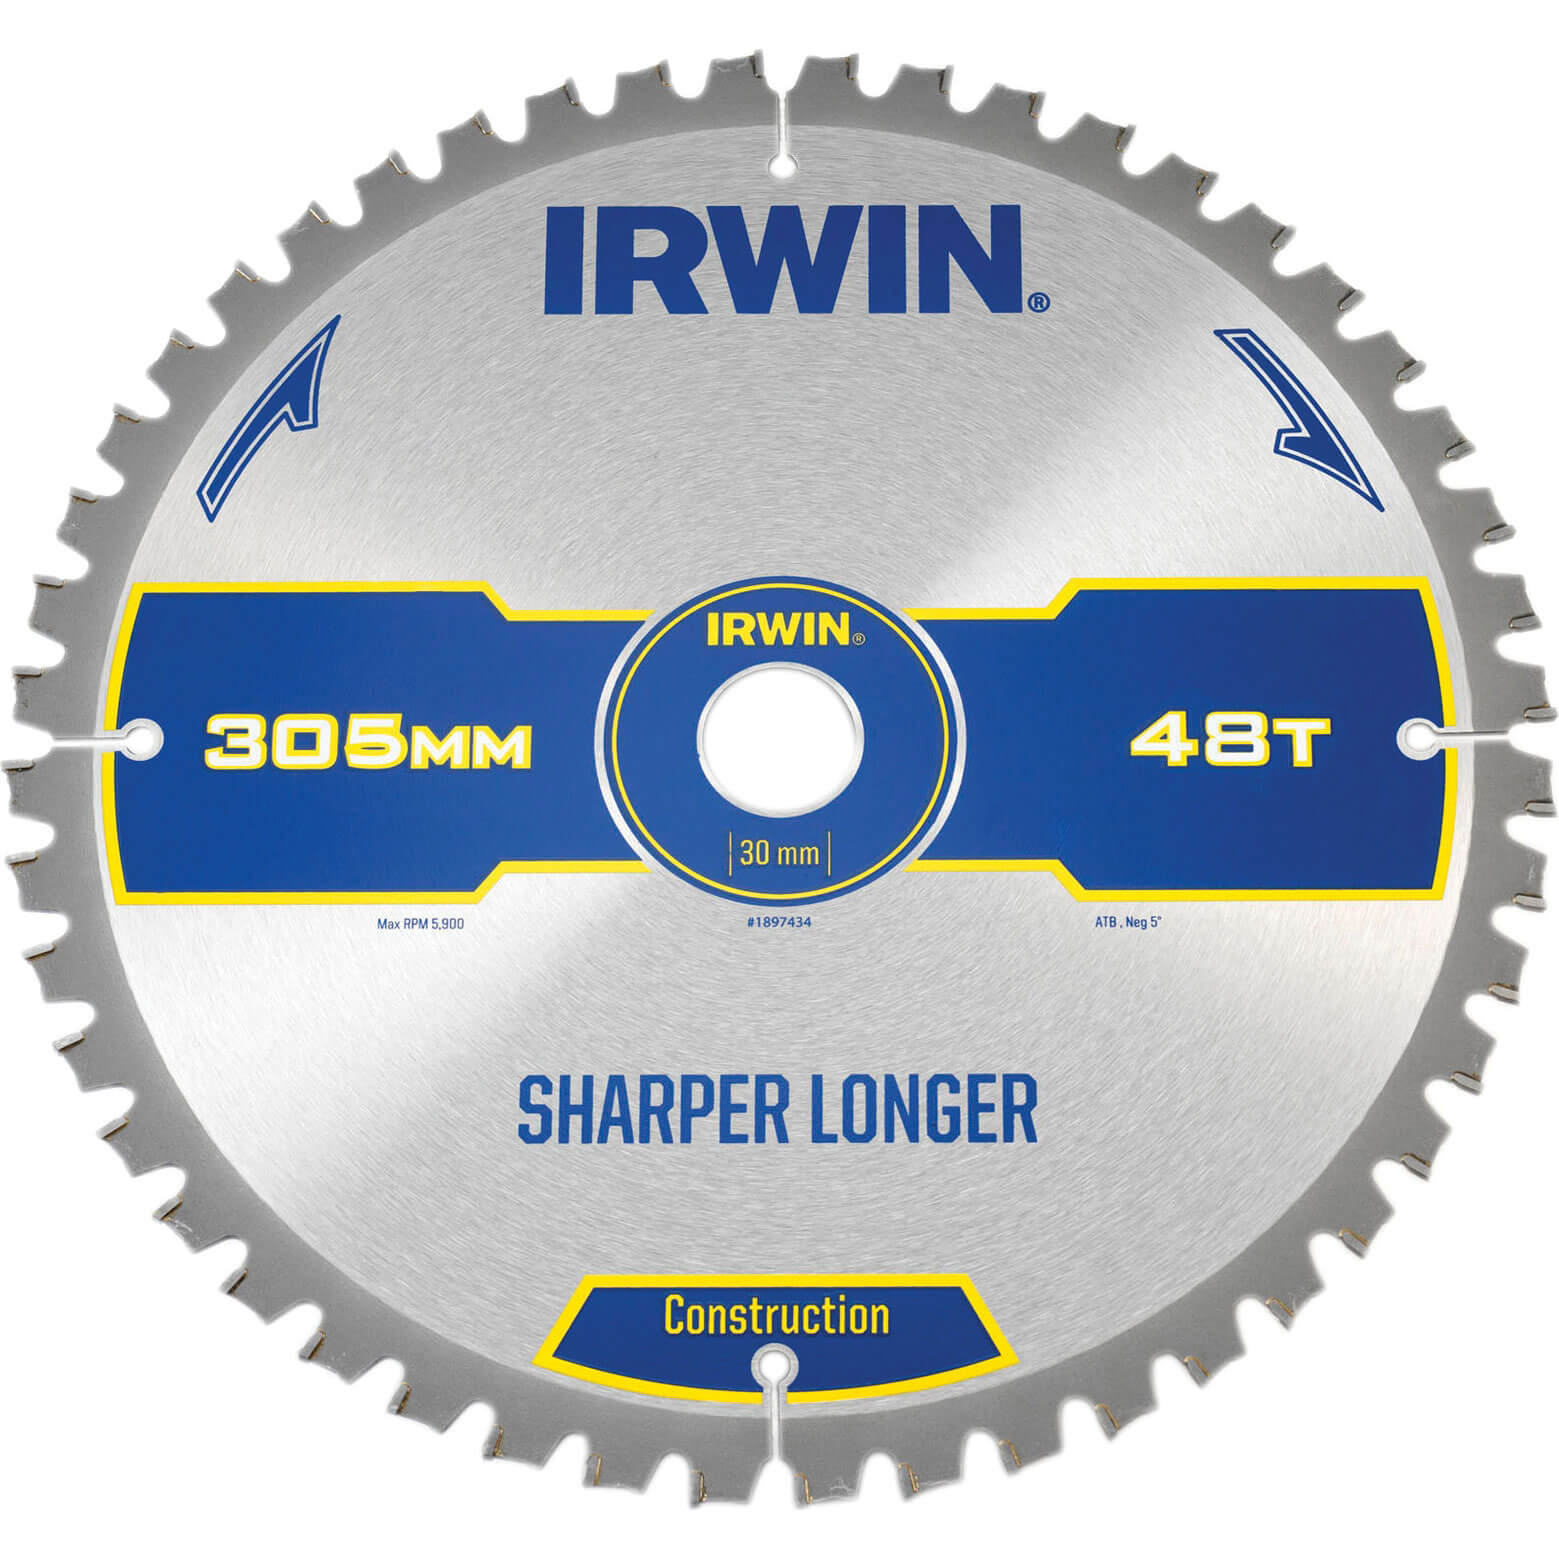 Image of Irwin ATB Ultra Construction Circular Saw Blade 305mm 48T 30mm